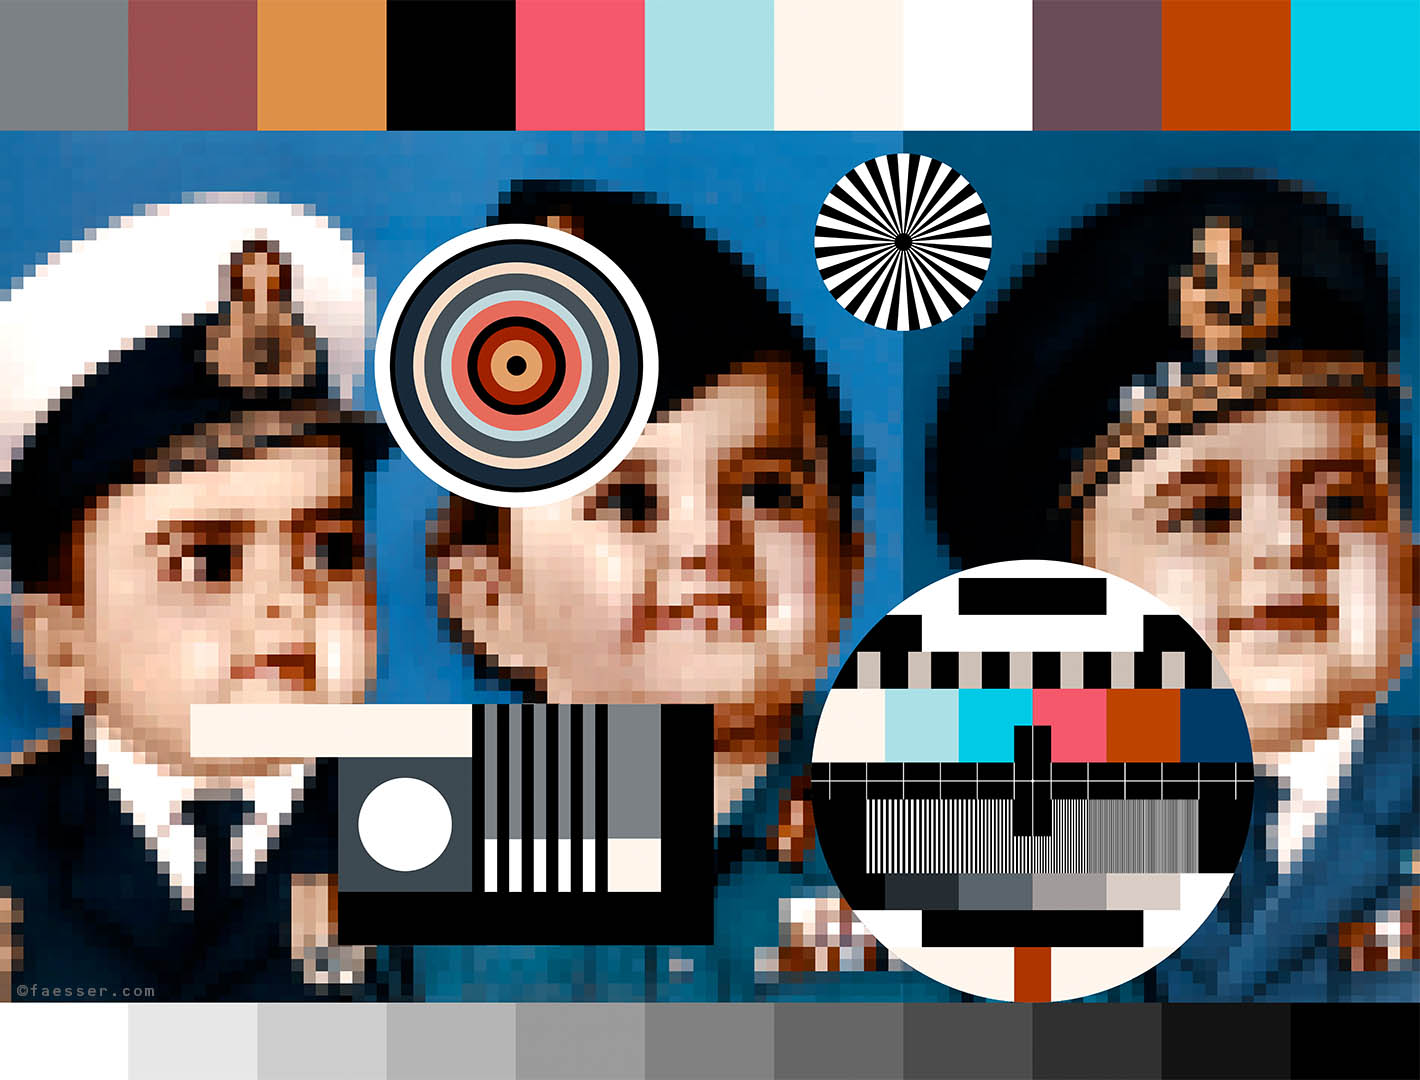 Three pixelated child admirals overlaid with TV charts; artist Roland Faesser, sculptor and painter 2020